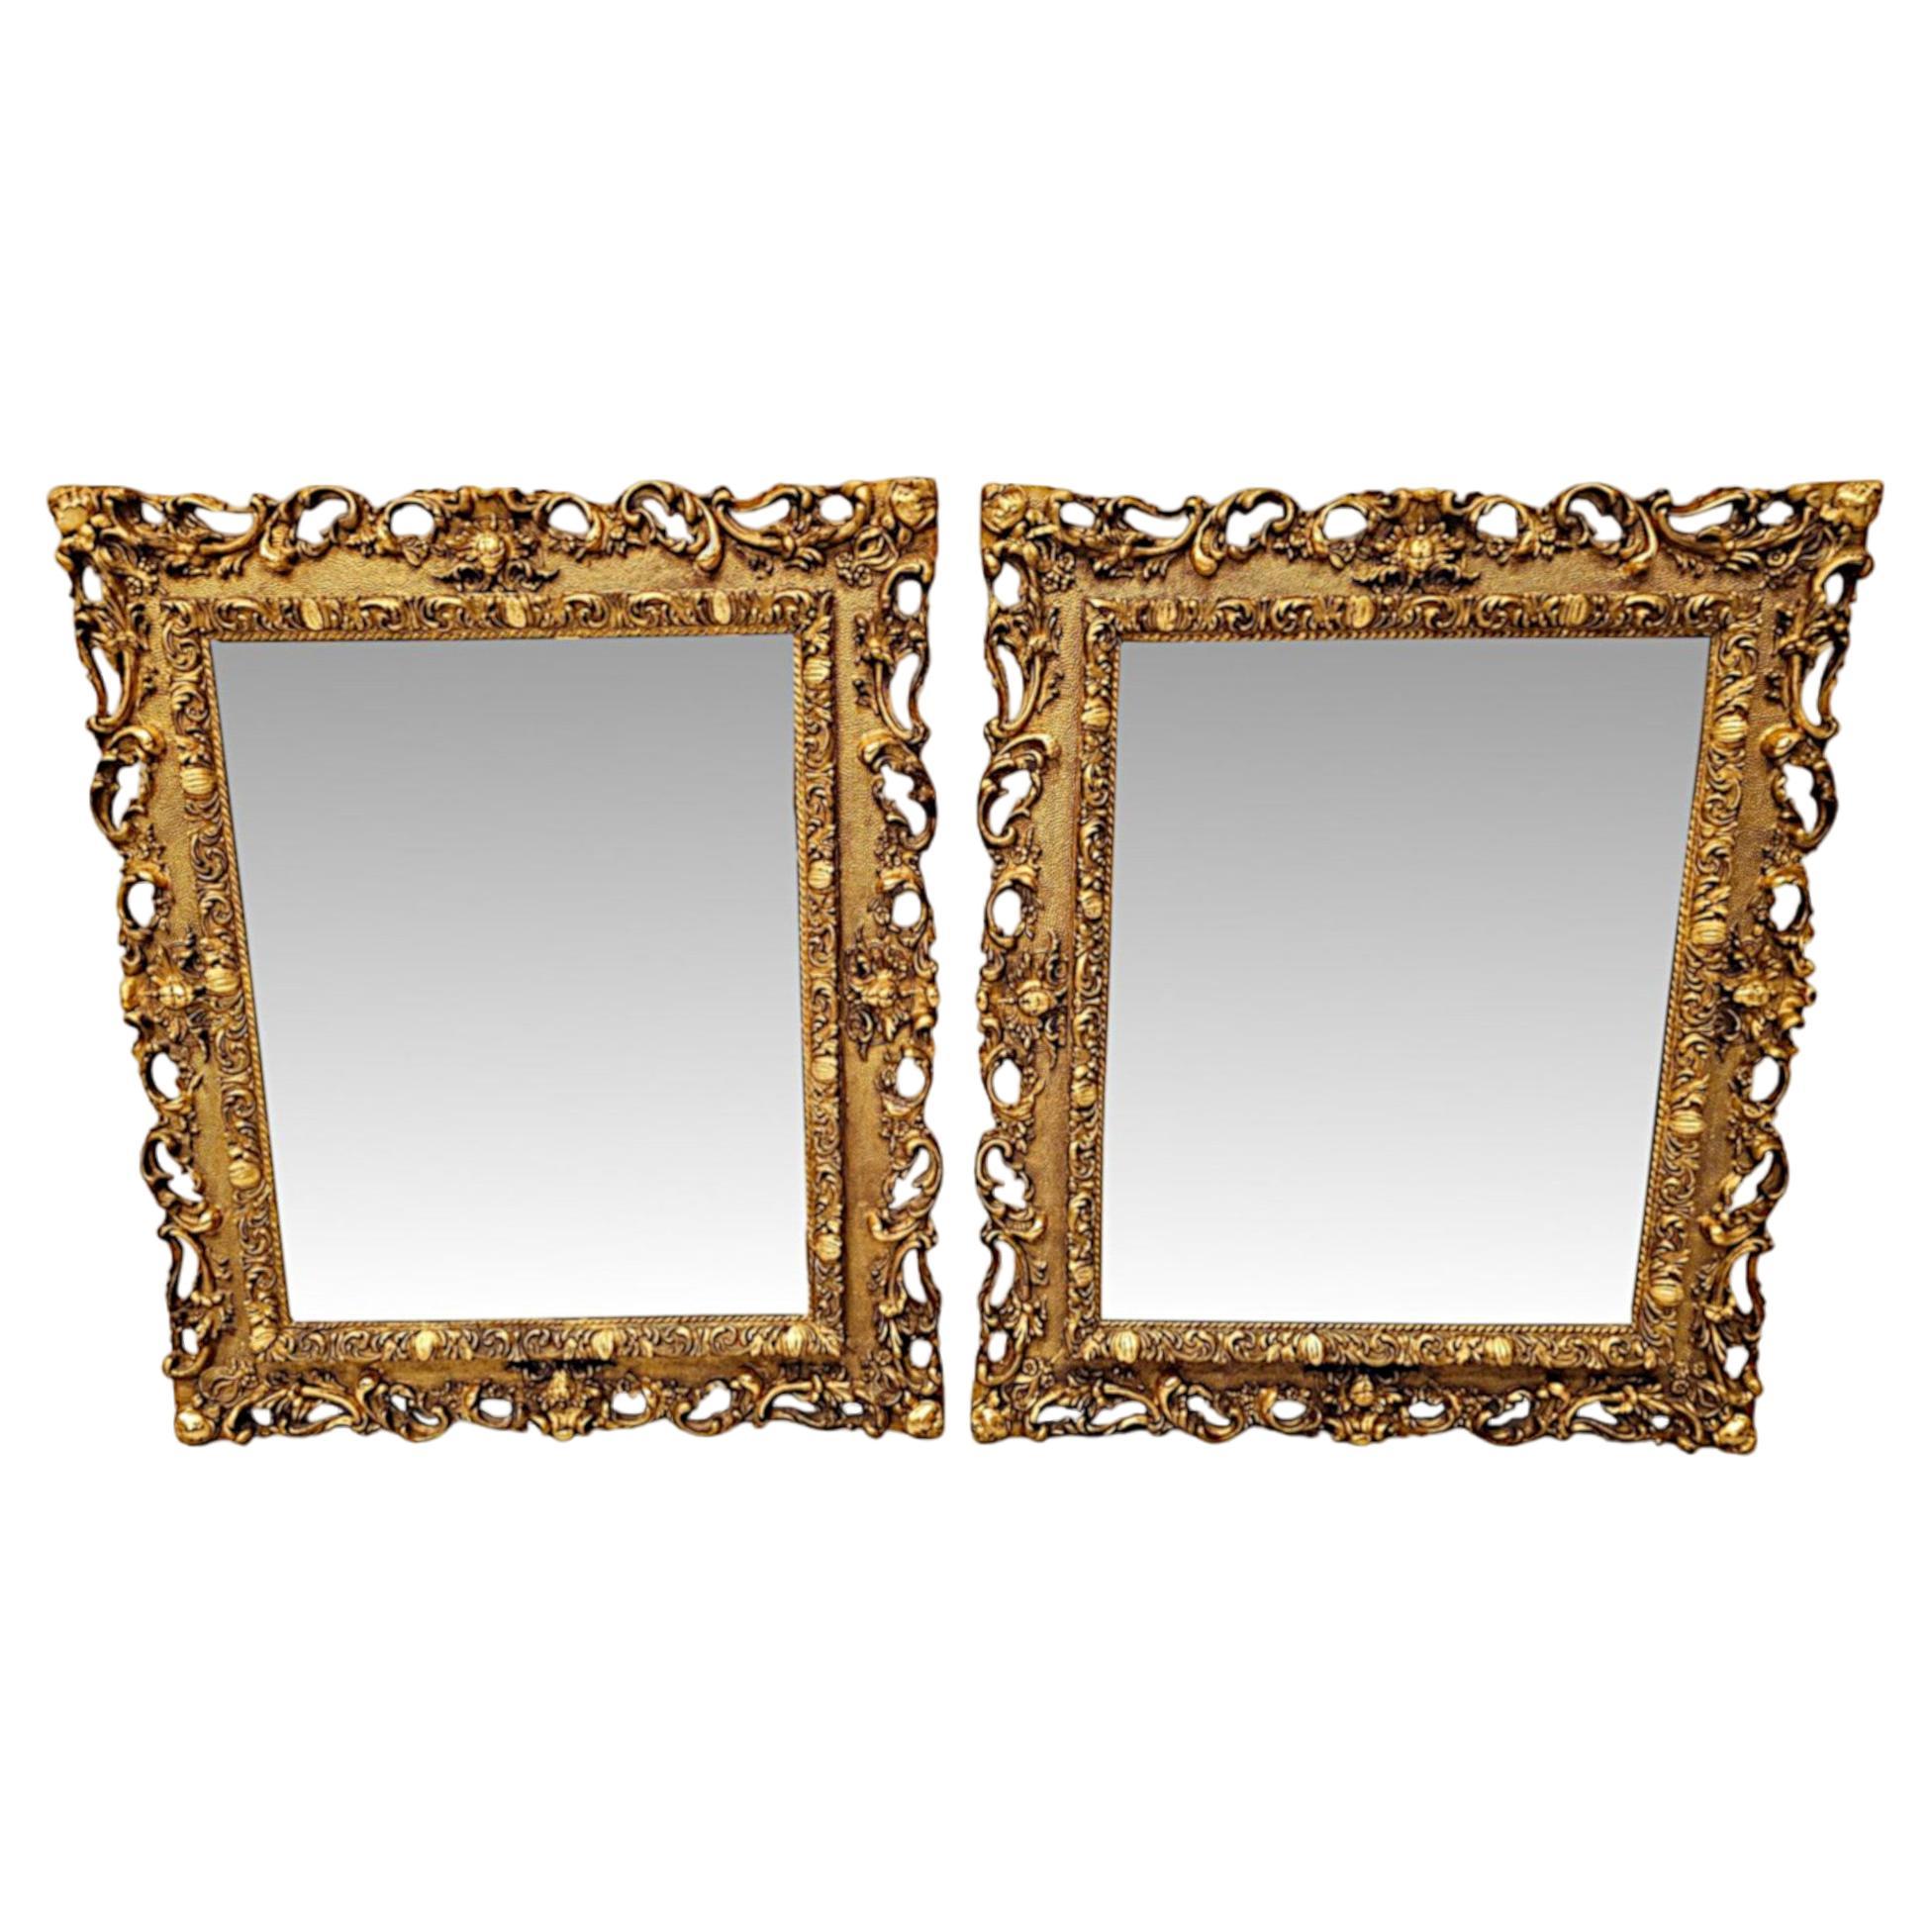 A Very Rare Pair of Late 19th Century Giltwood Framed Mirrors For Sale